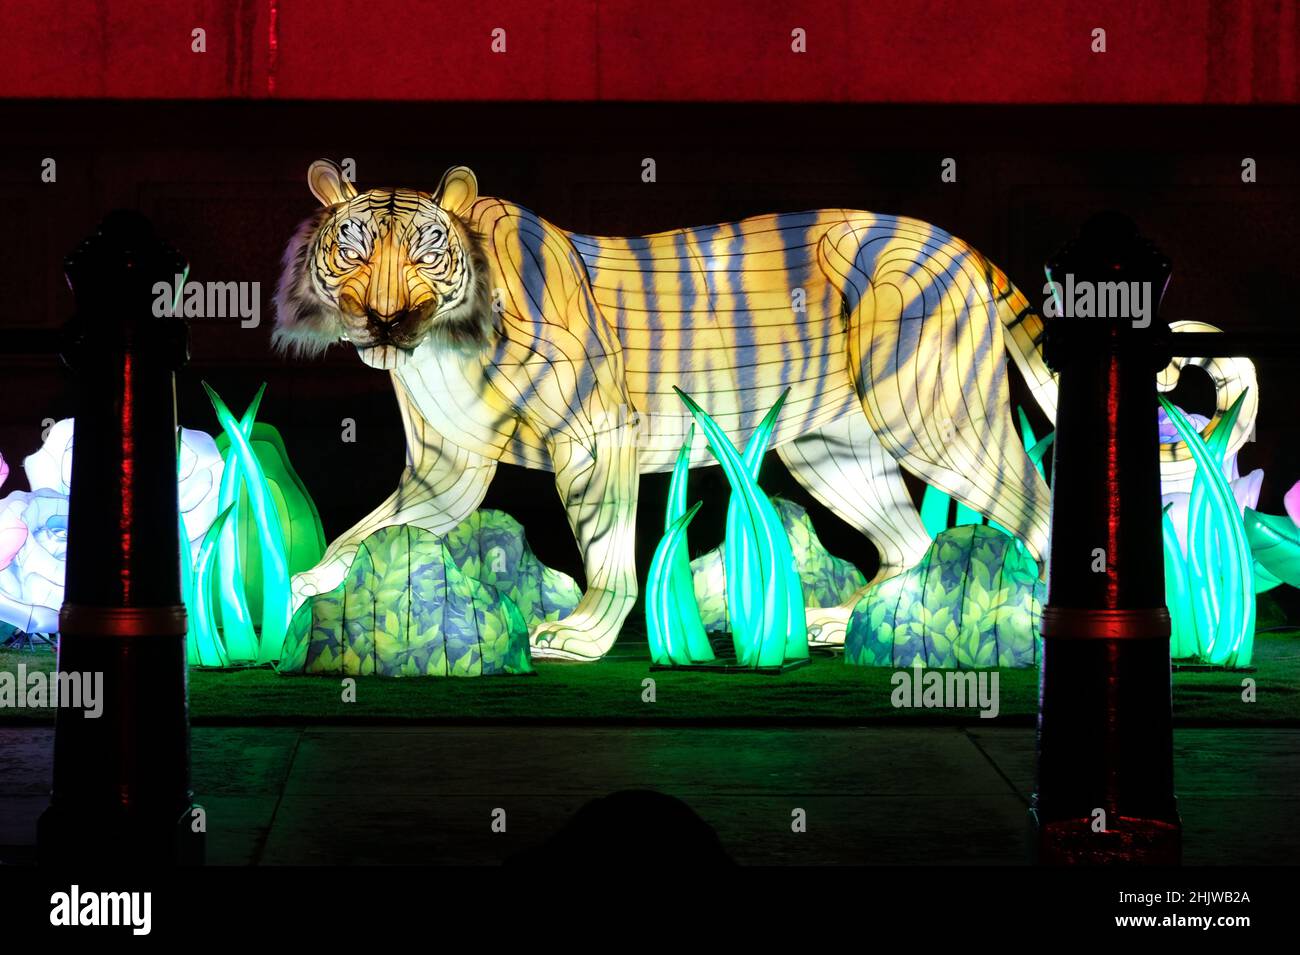 London, UK, 31st Jan, 2022.  An illuminated tiger in Trafalgar Square as part of Chinese New Year celebrations, which falls on February 1st and ushers in the Year of the Tiger.  A lion and dragon dance was performed mainly for dignataries and officials as planned public celebrations were scaled back this year due to Covid pandemic related planning time issues.  Credit: Eleventh Hour Photography/Alamy Live News Stock Photo